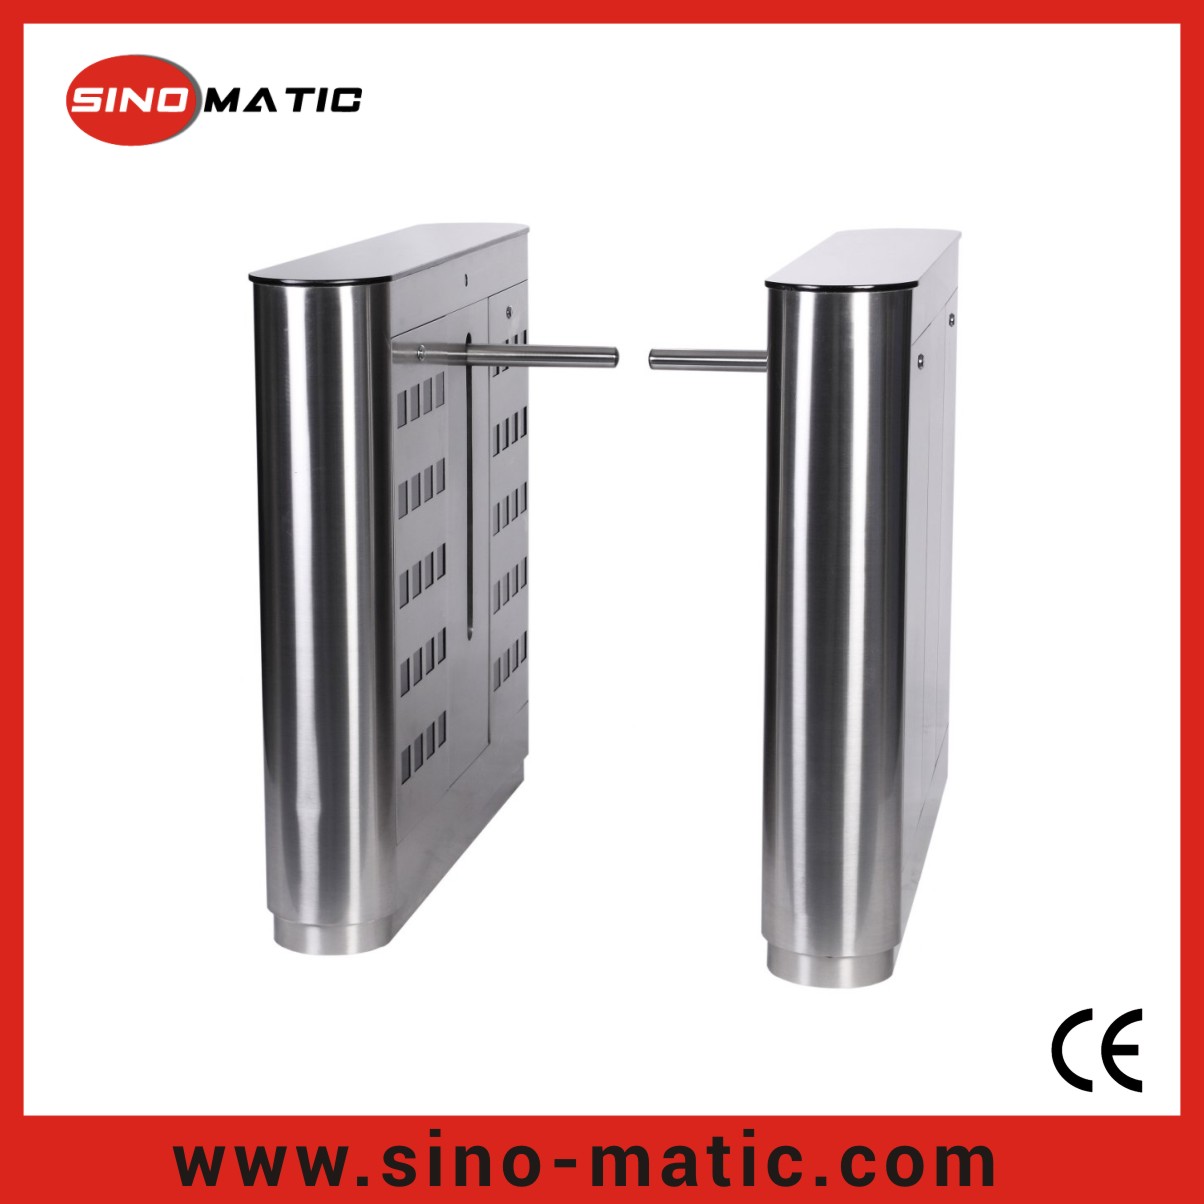 China Sinomatic Access control Automatic Barrier Arm Barrier China Supplier wholesale